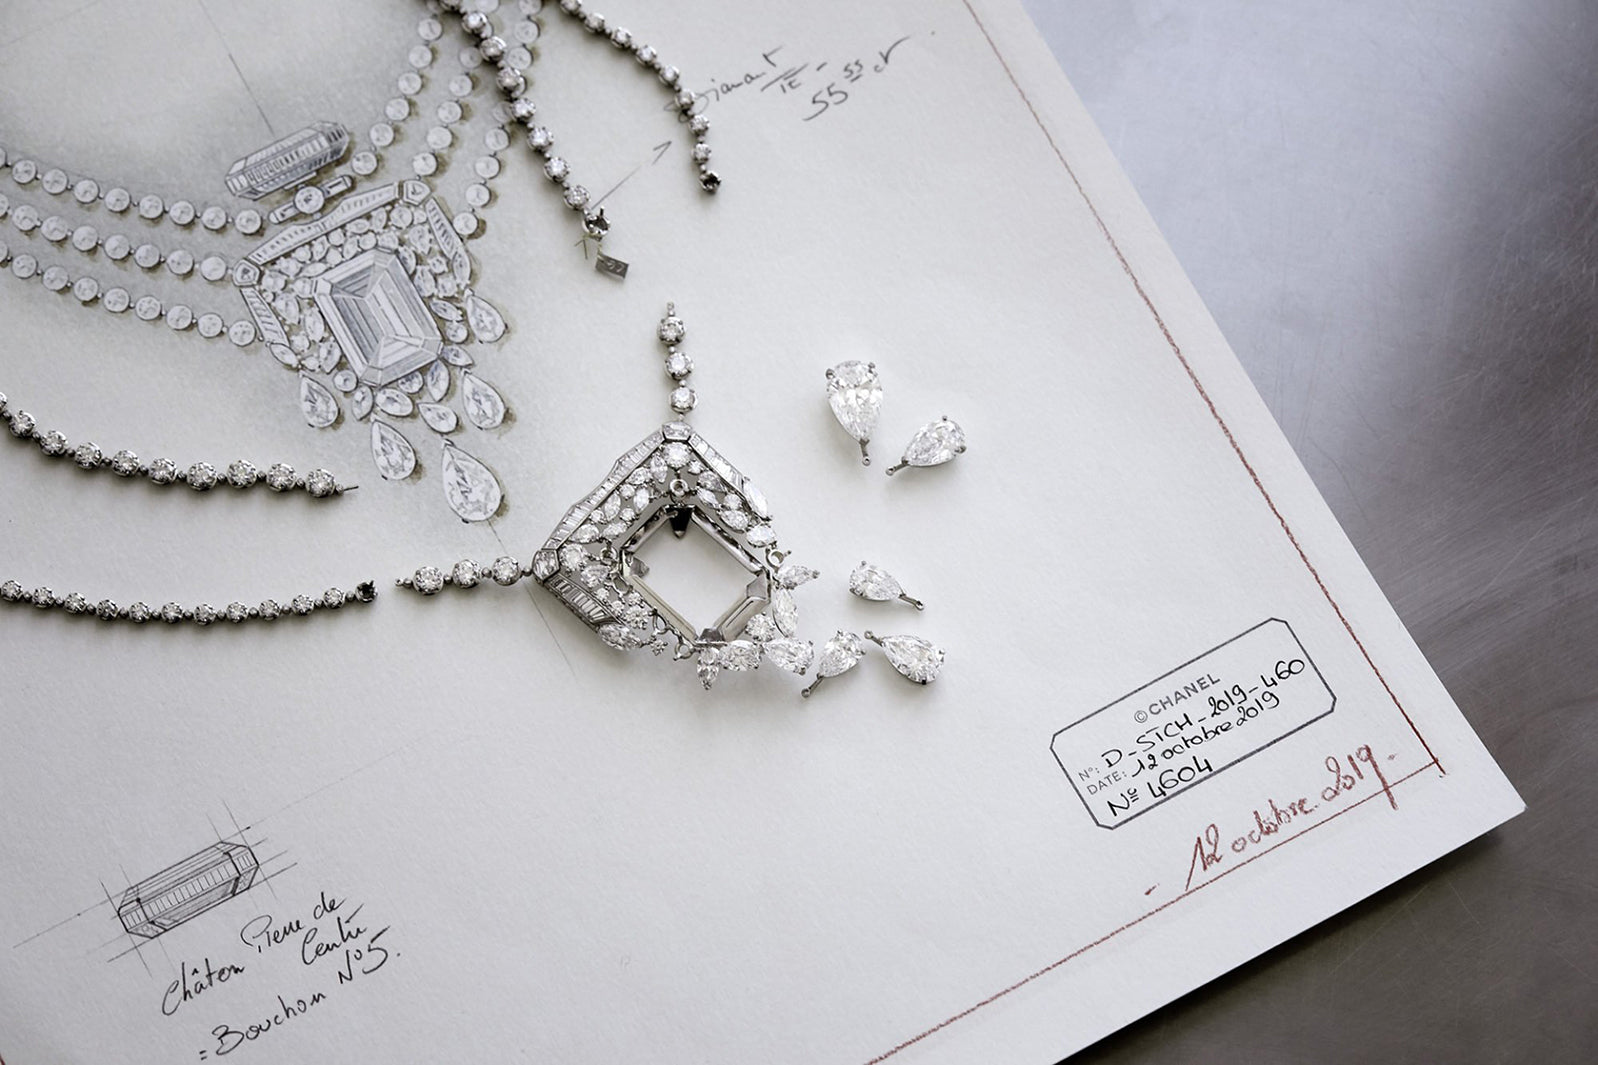 Chanel Unveils a 55.55 Carat Necklace Celebrating 100 Years of the